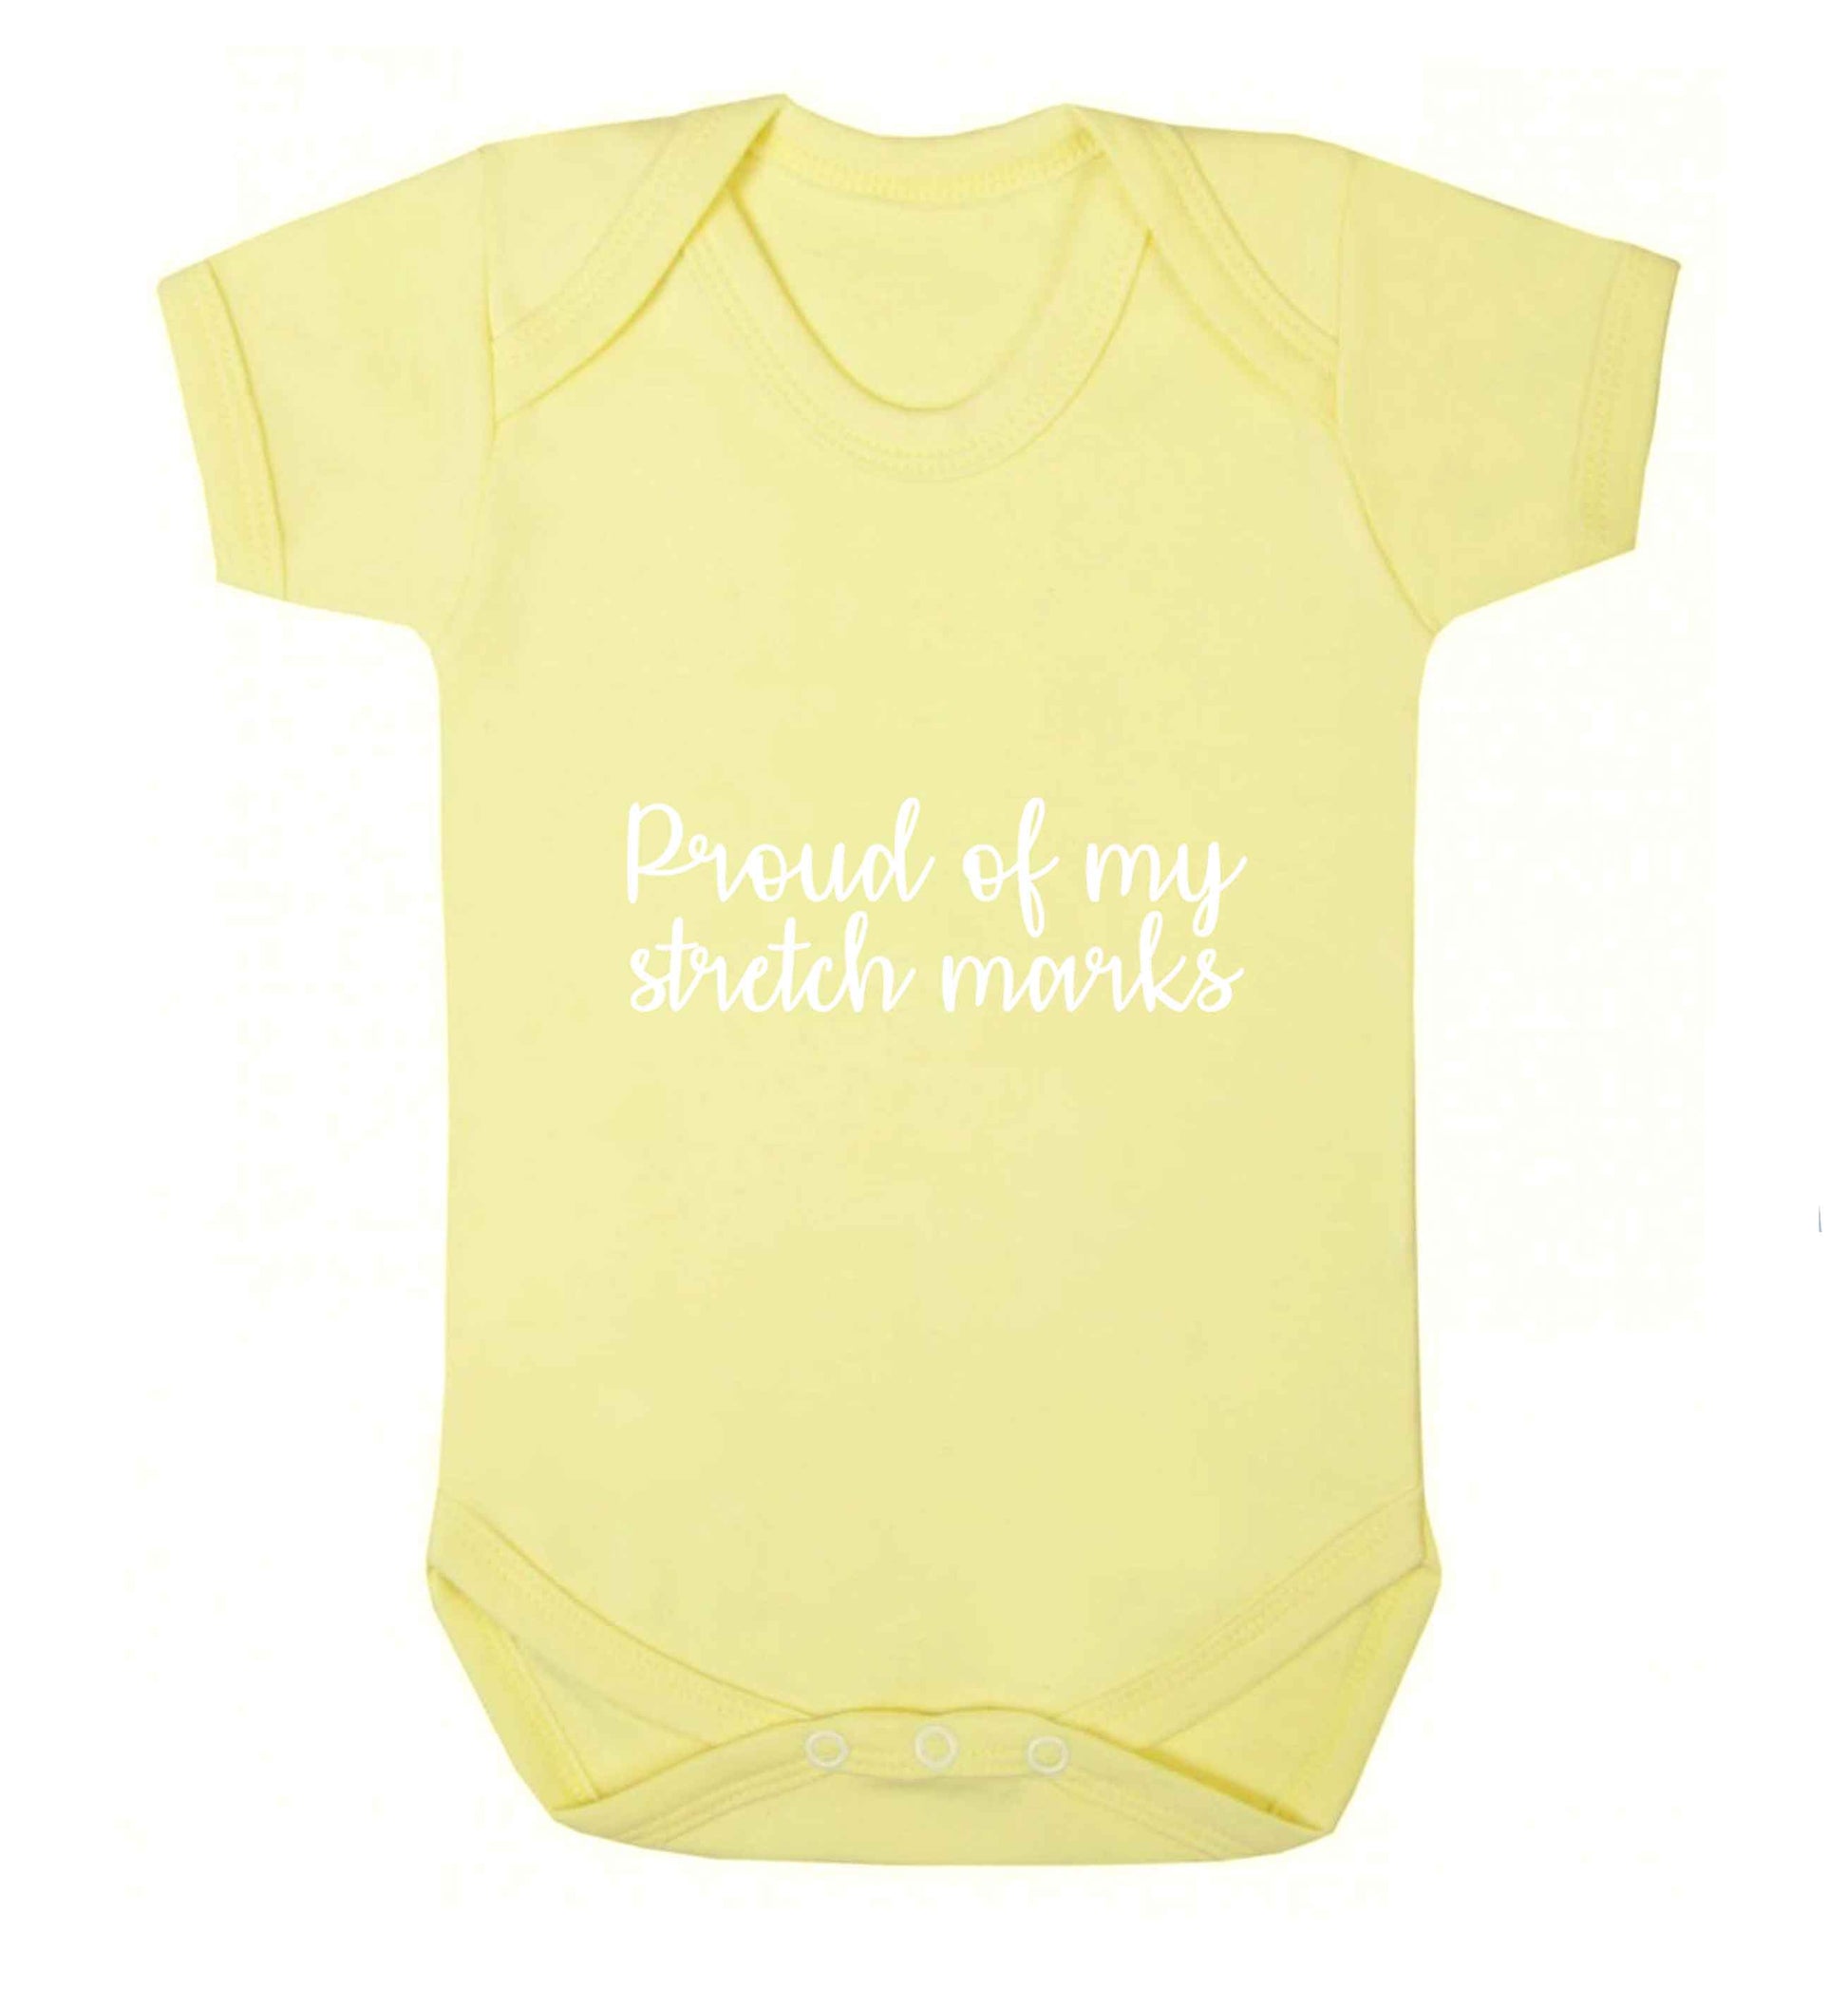 Proud of my stretch marks baby vest pale yellow 18-24 months